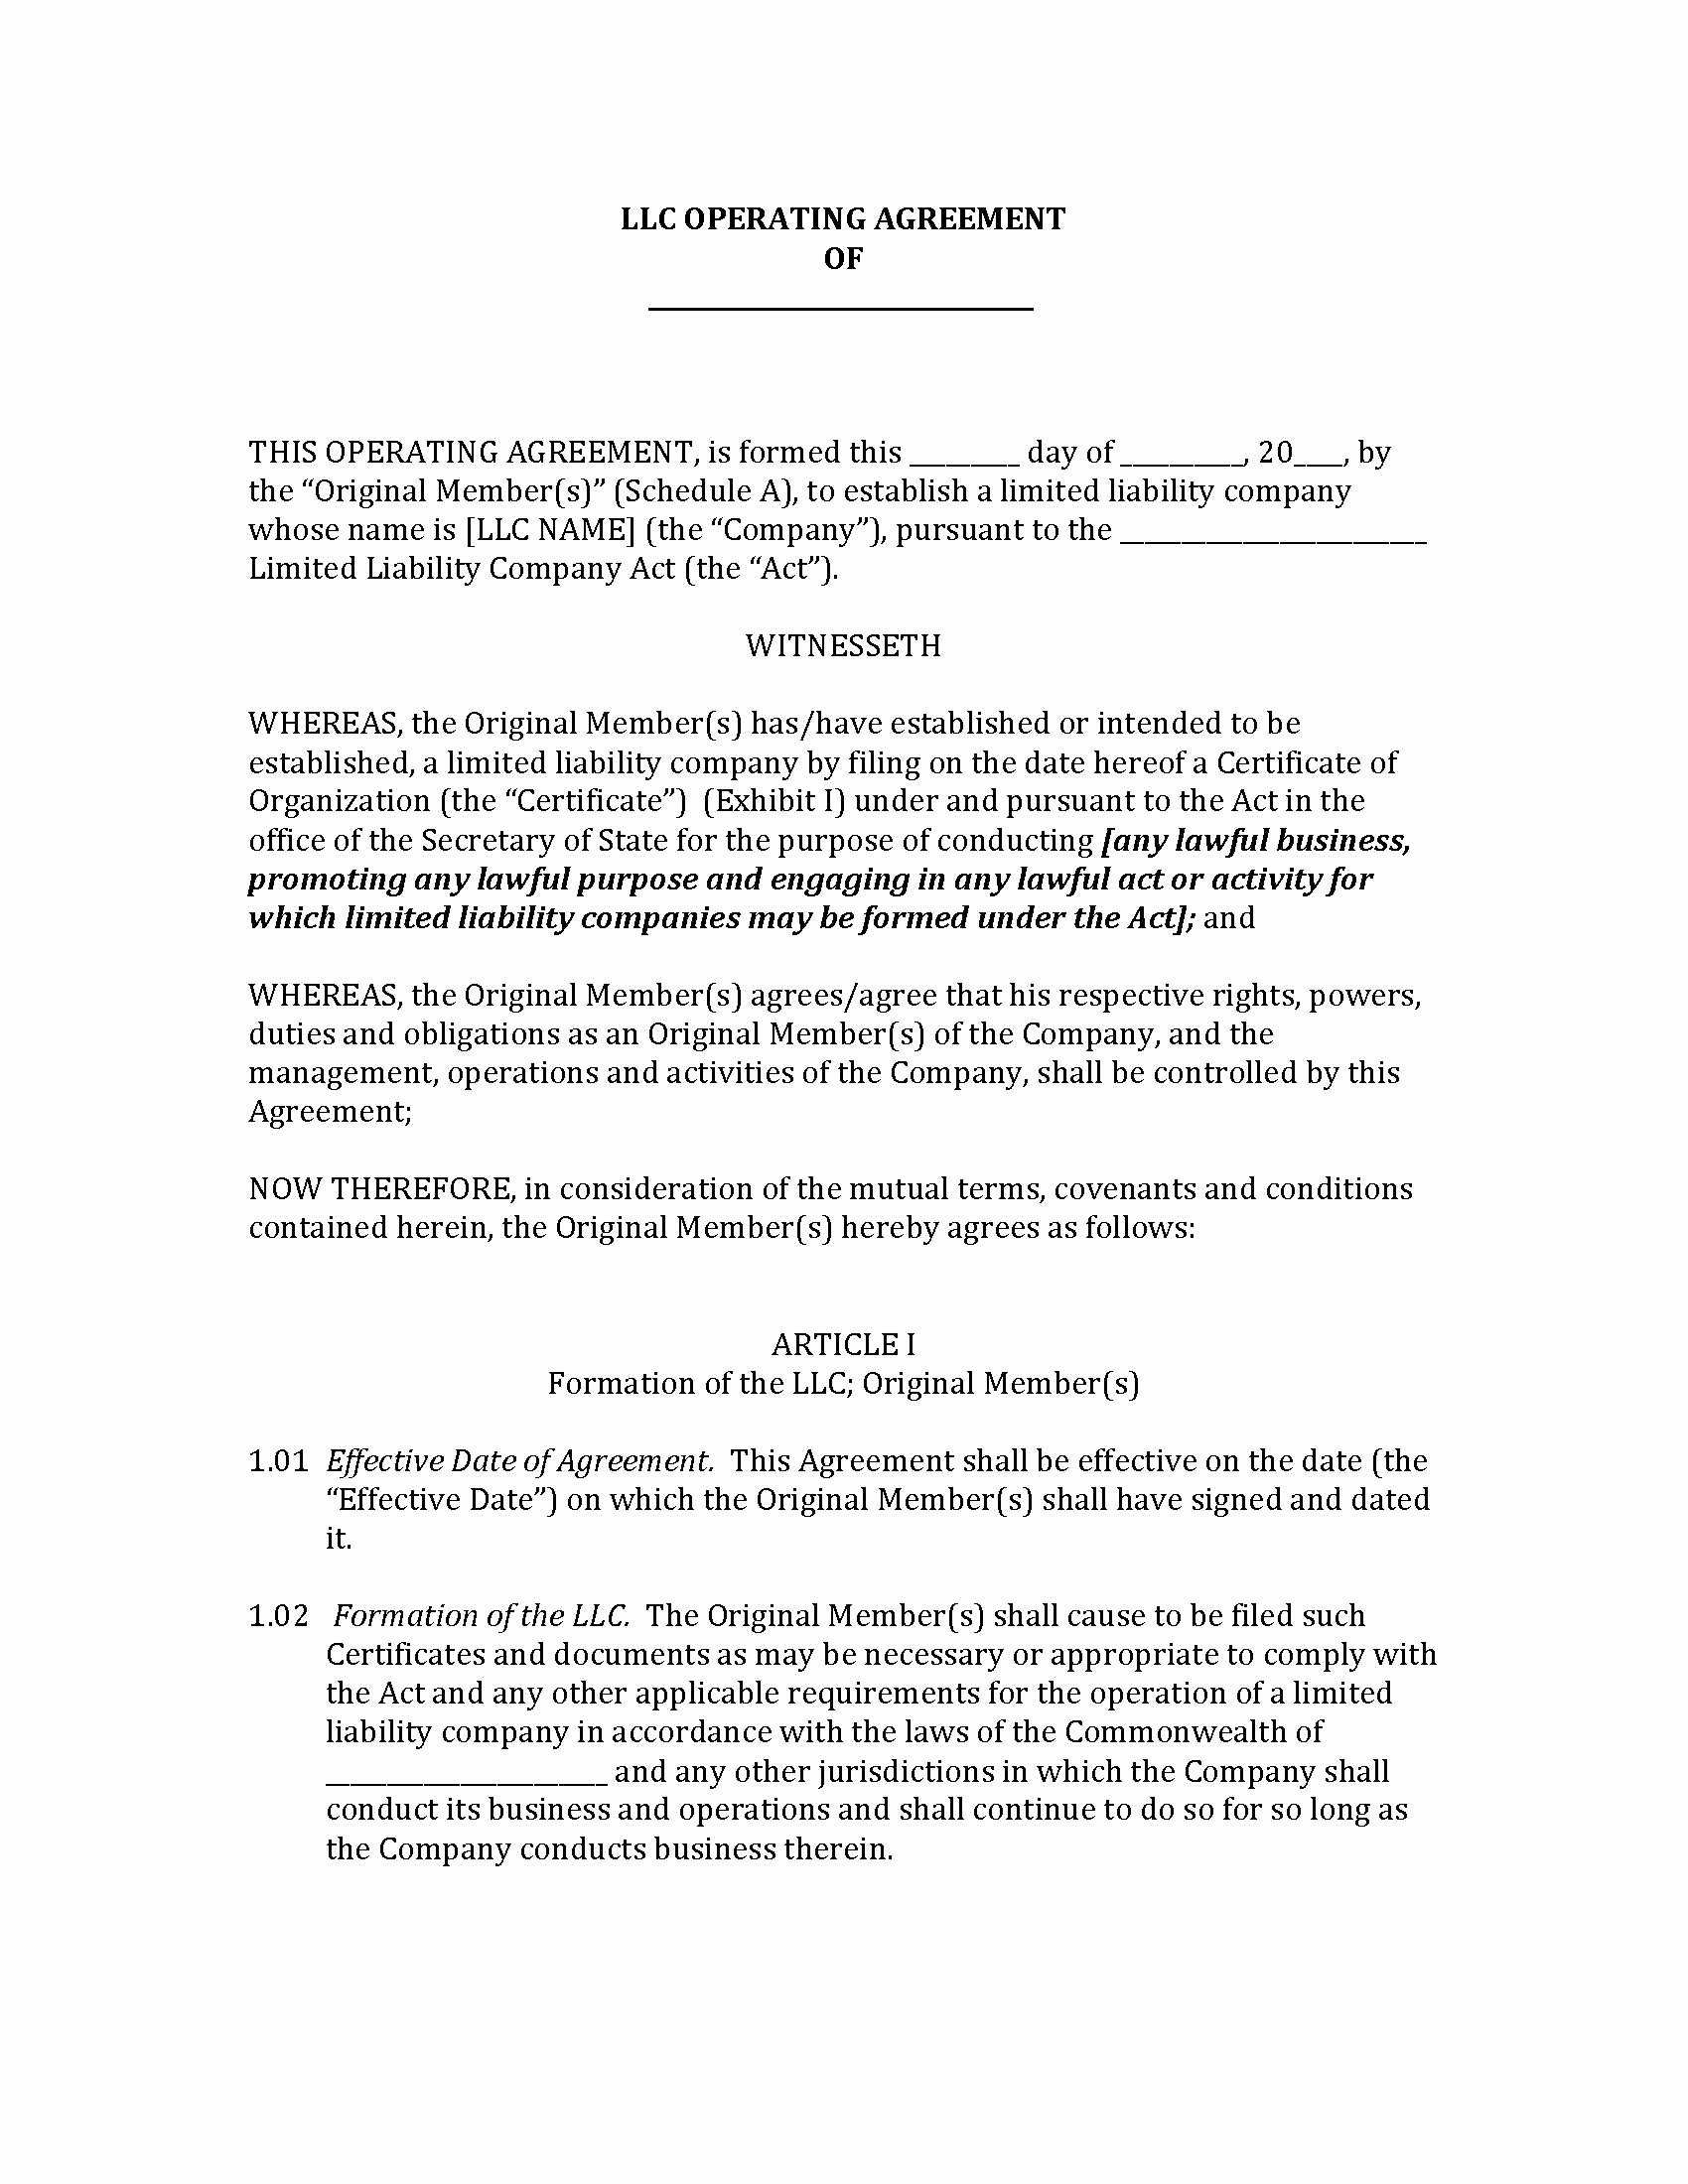 Delaware Single Member Llc Operating Agreement Awesome 50 New Document Oklahoma